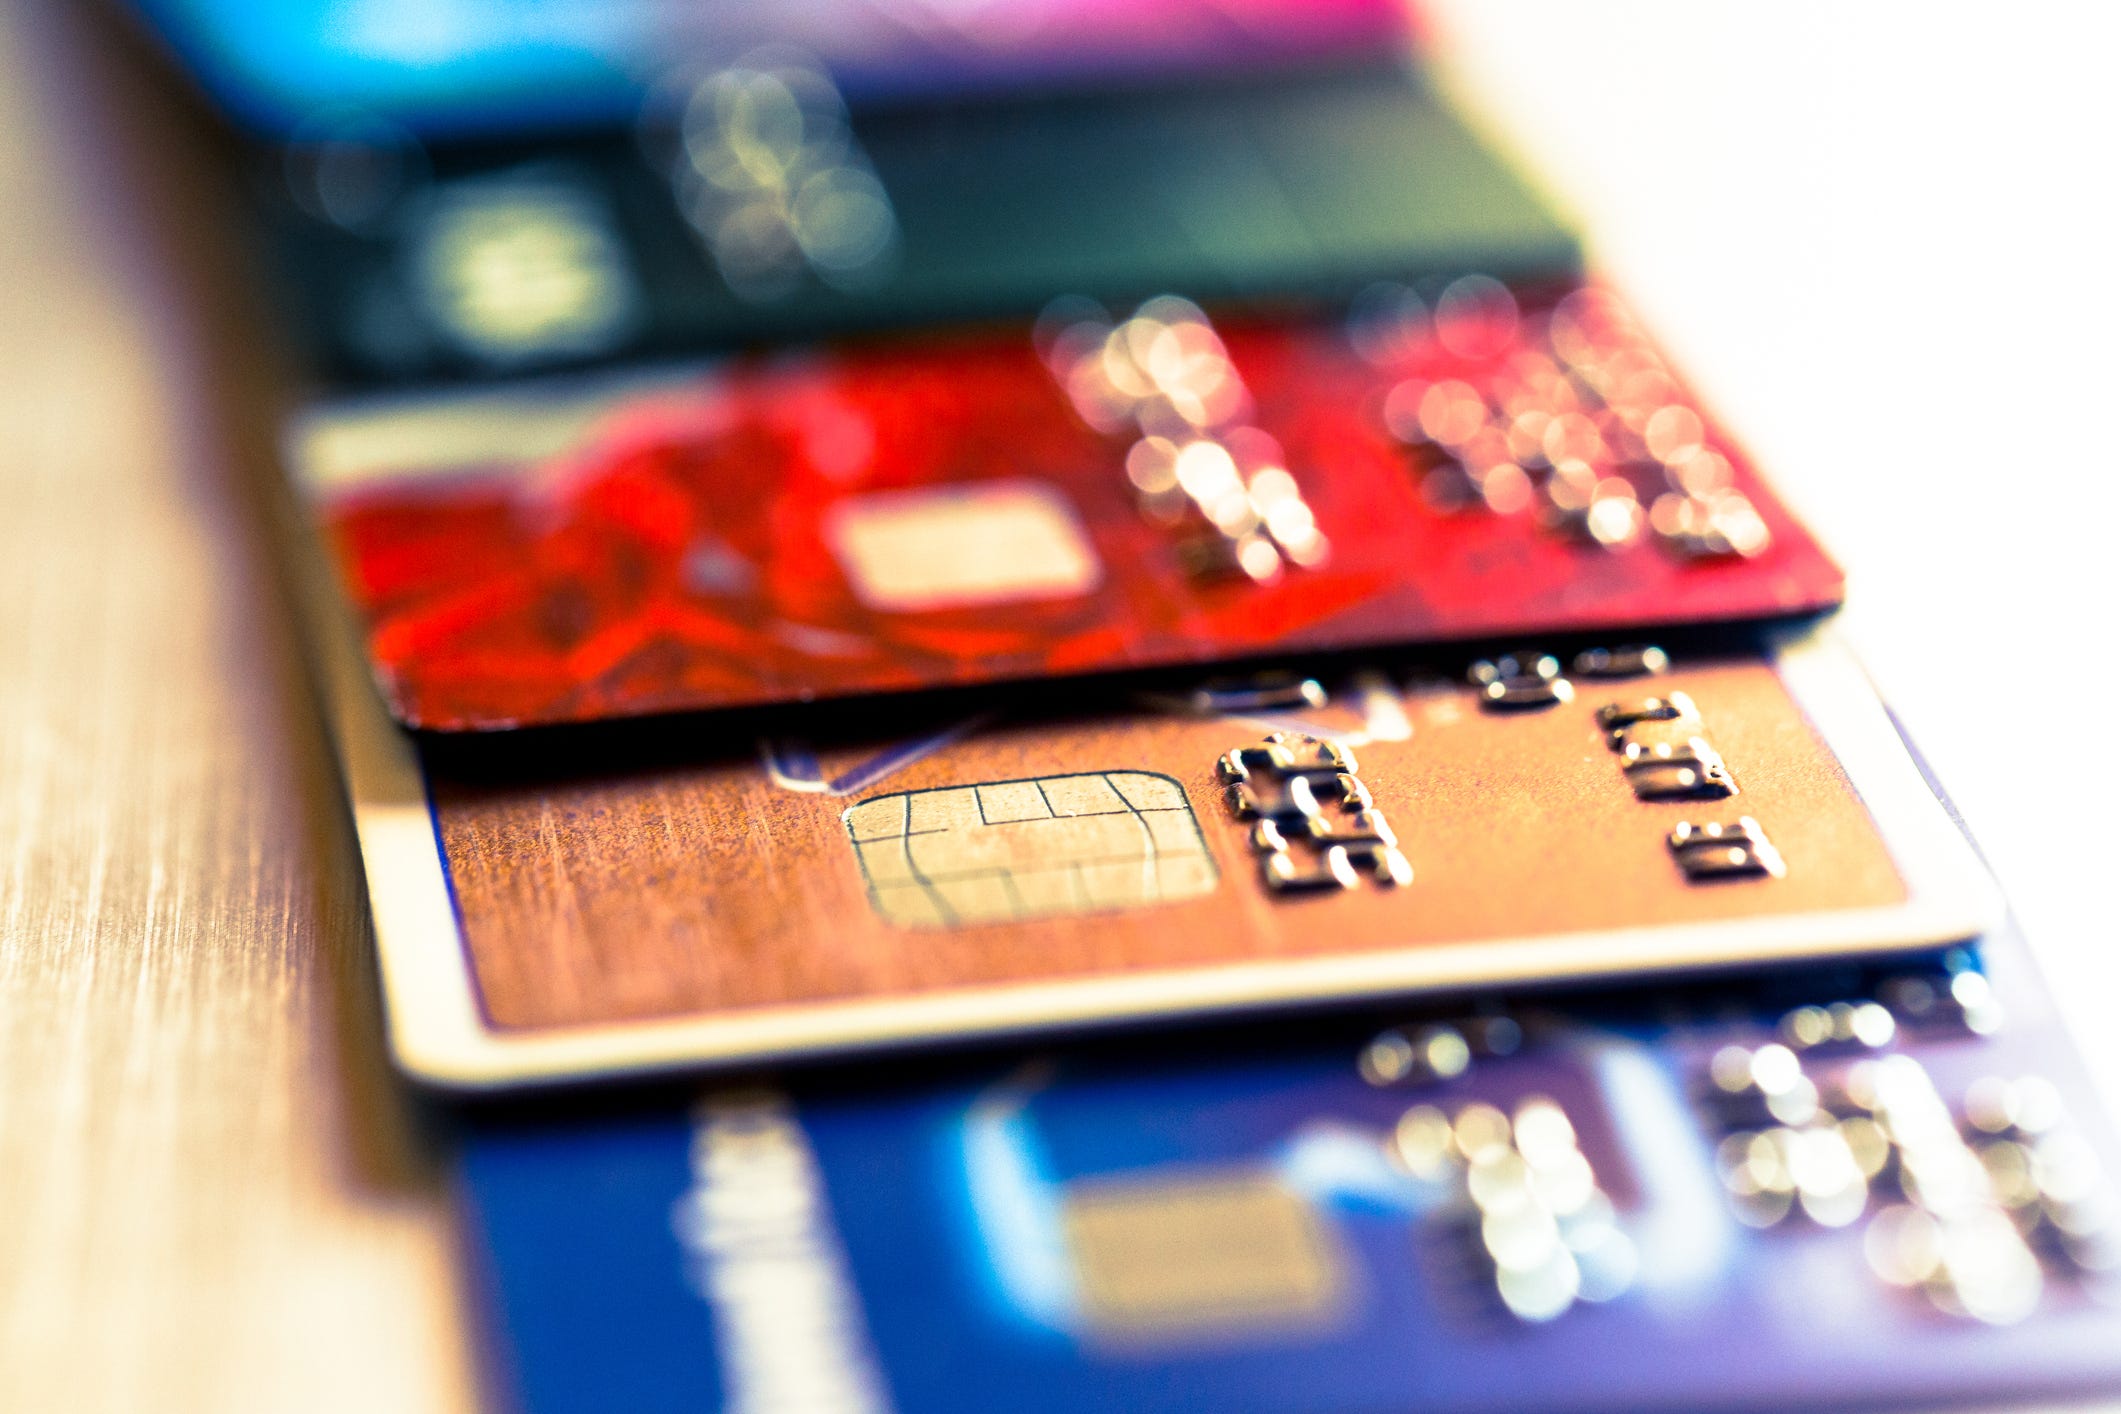 Credit card rules users of Visa, Mastercard, Capital One must follow